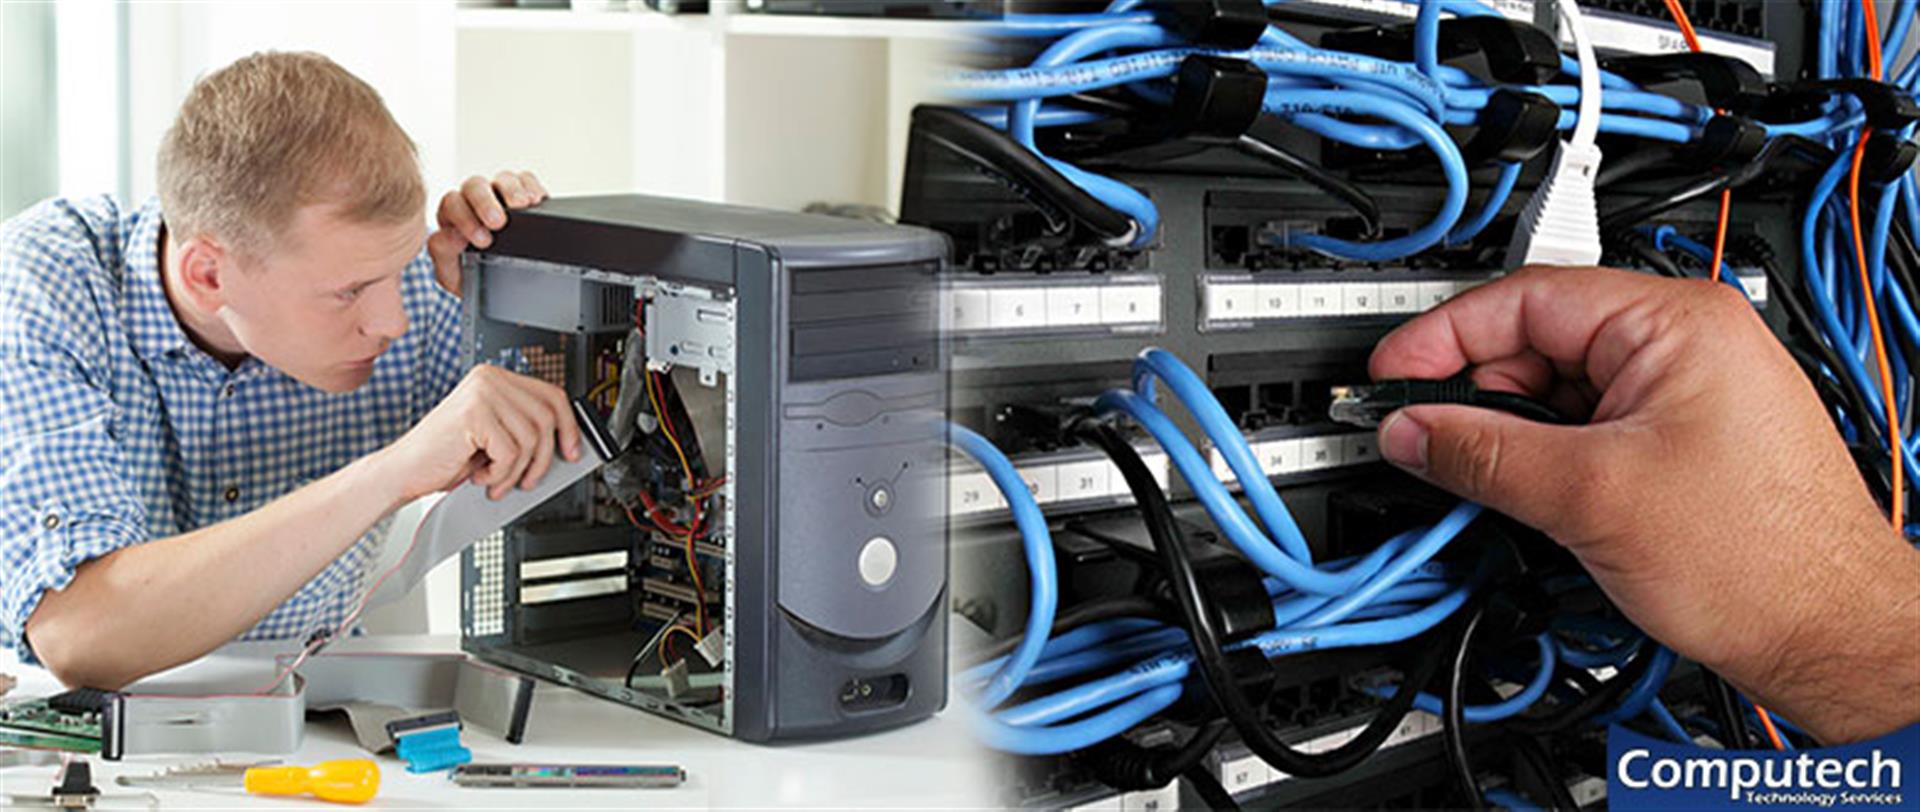 Madisonville Tennessee On-Site PC & Printer Repairs, Networking, Voice & Data Cabling Services